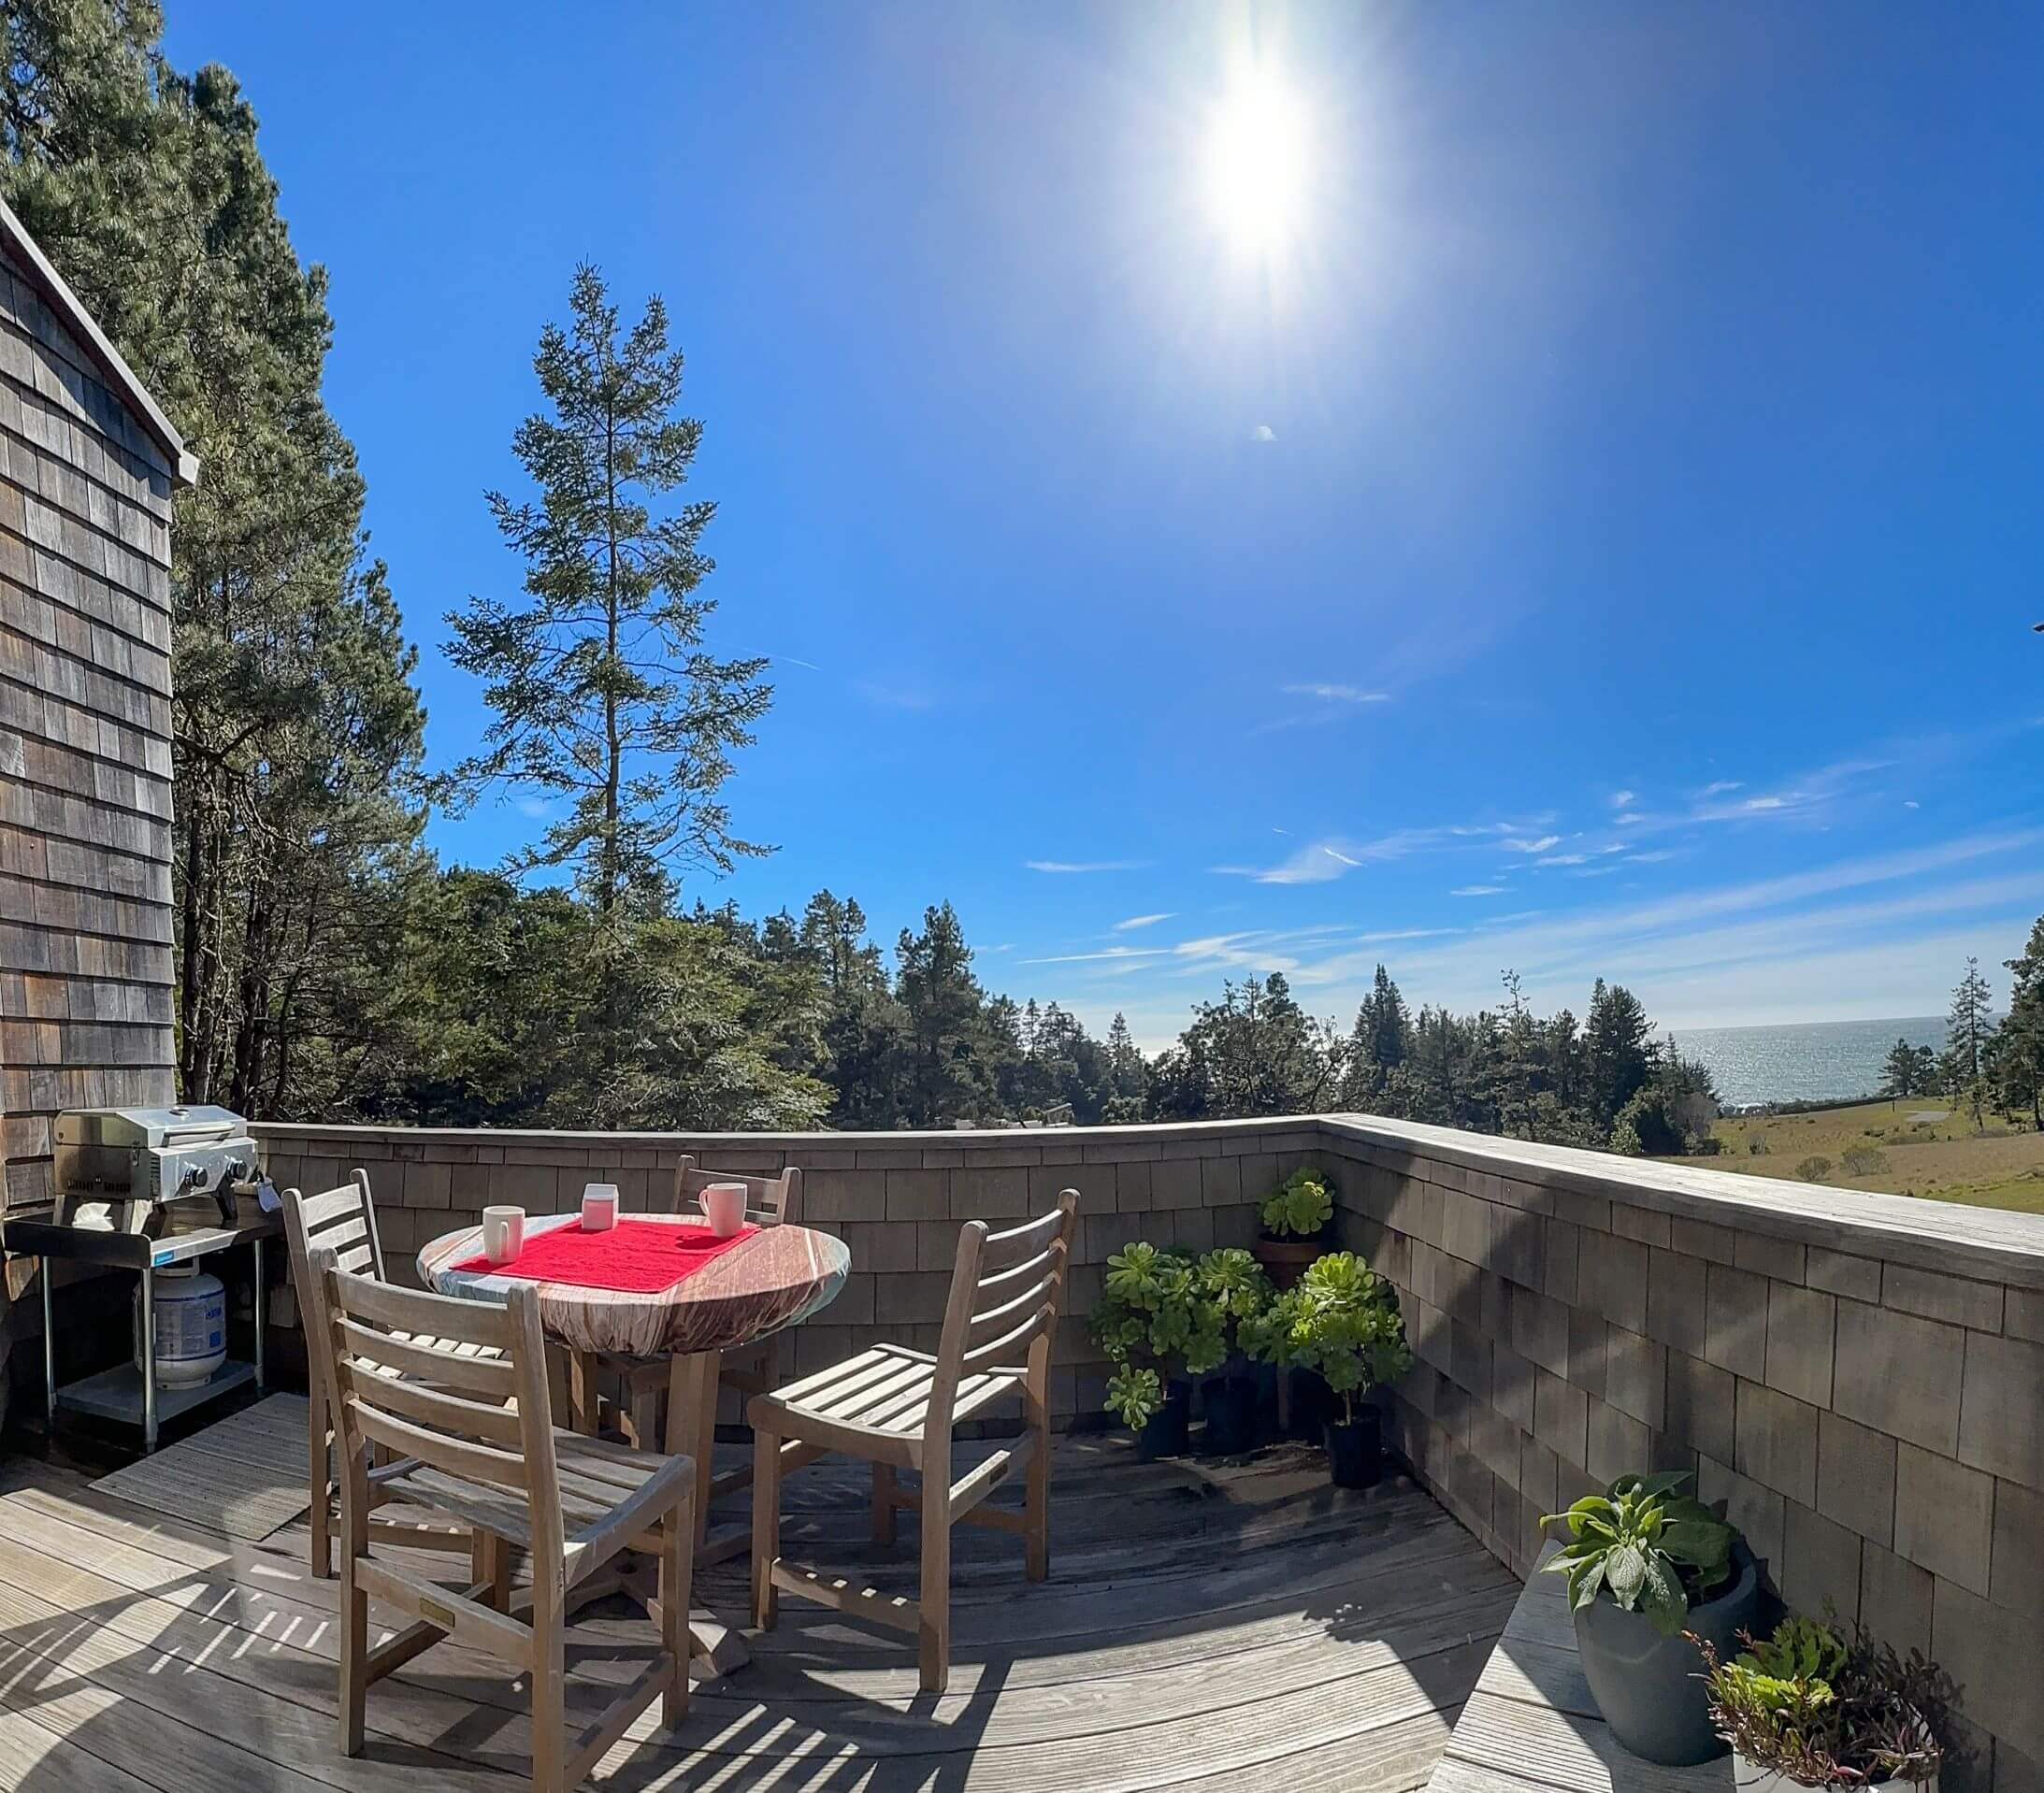 Seaview: outside deck with grill and wood table, view of hillside trees and blue sky.